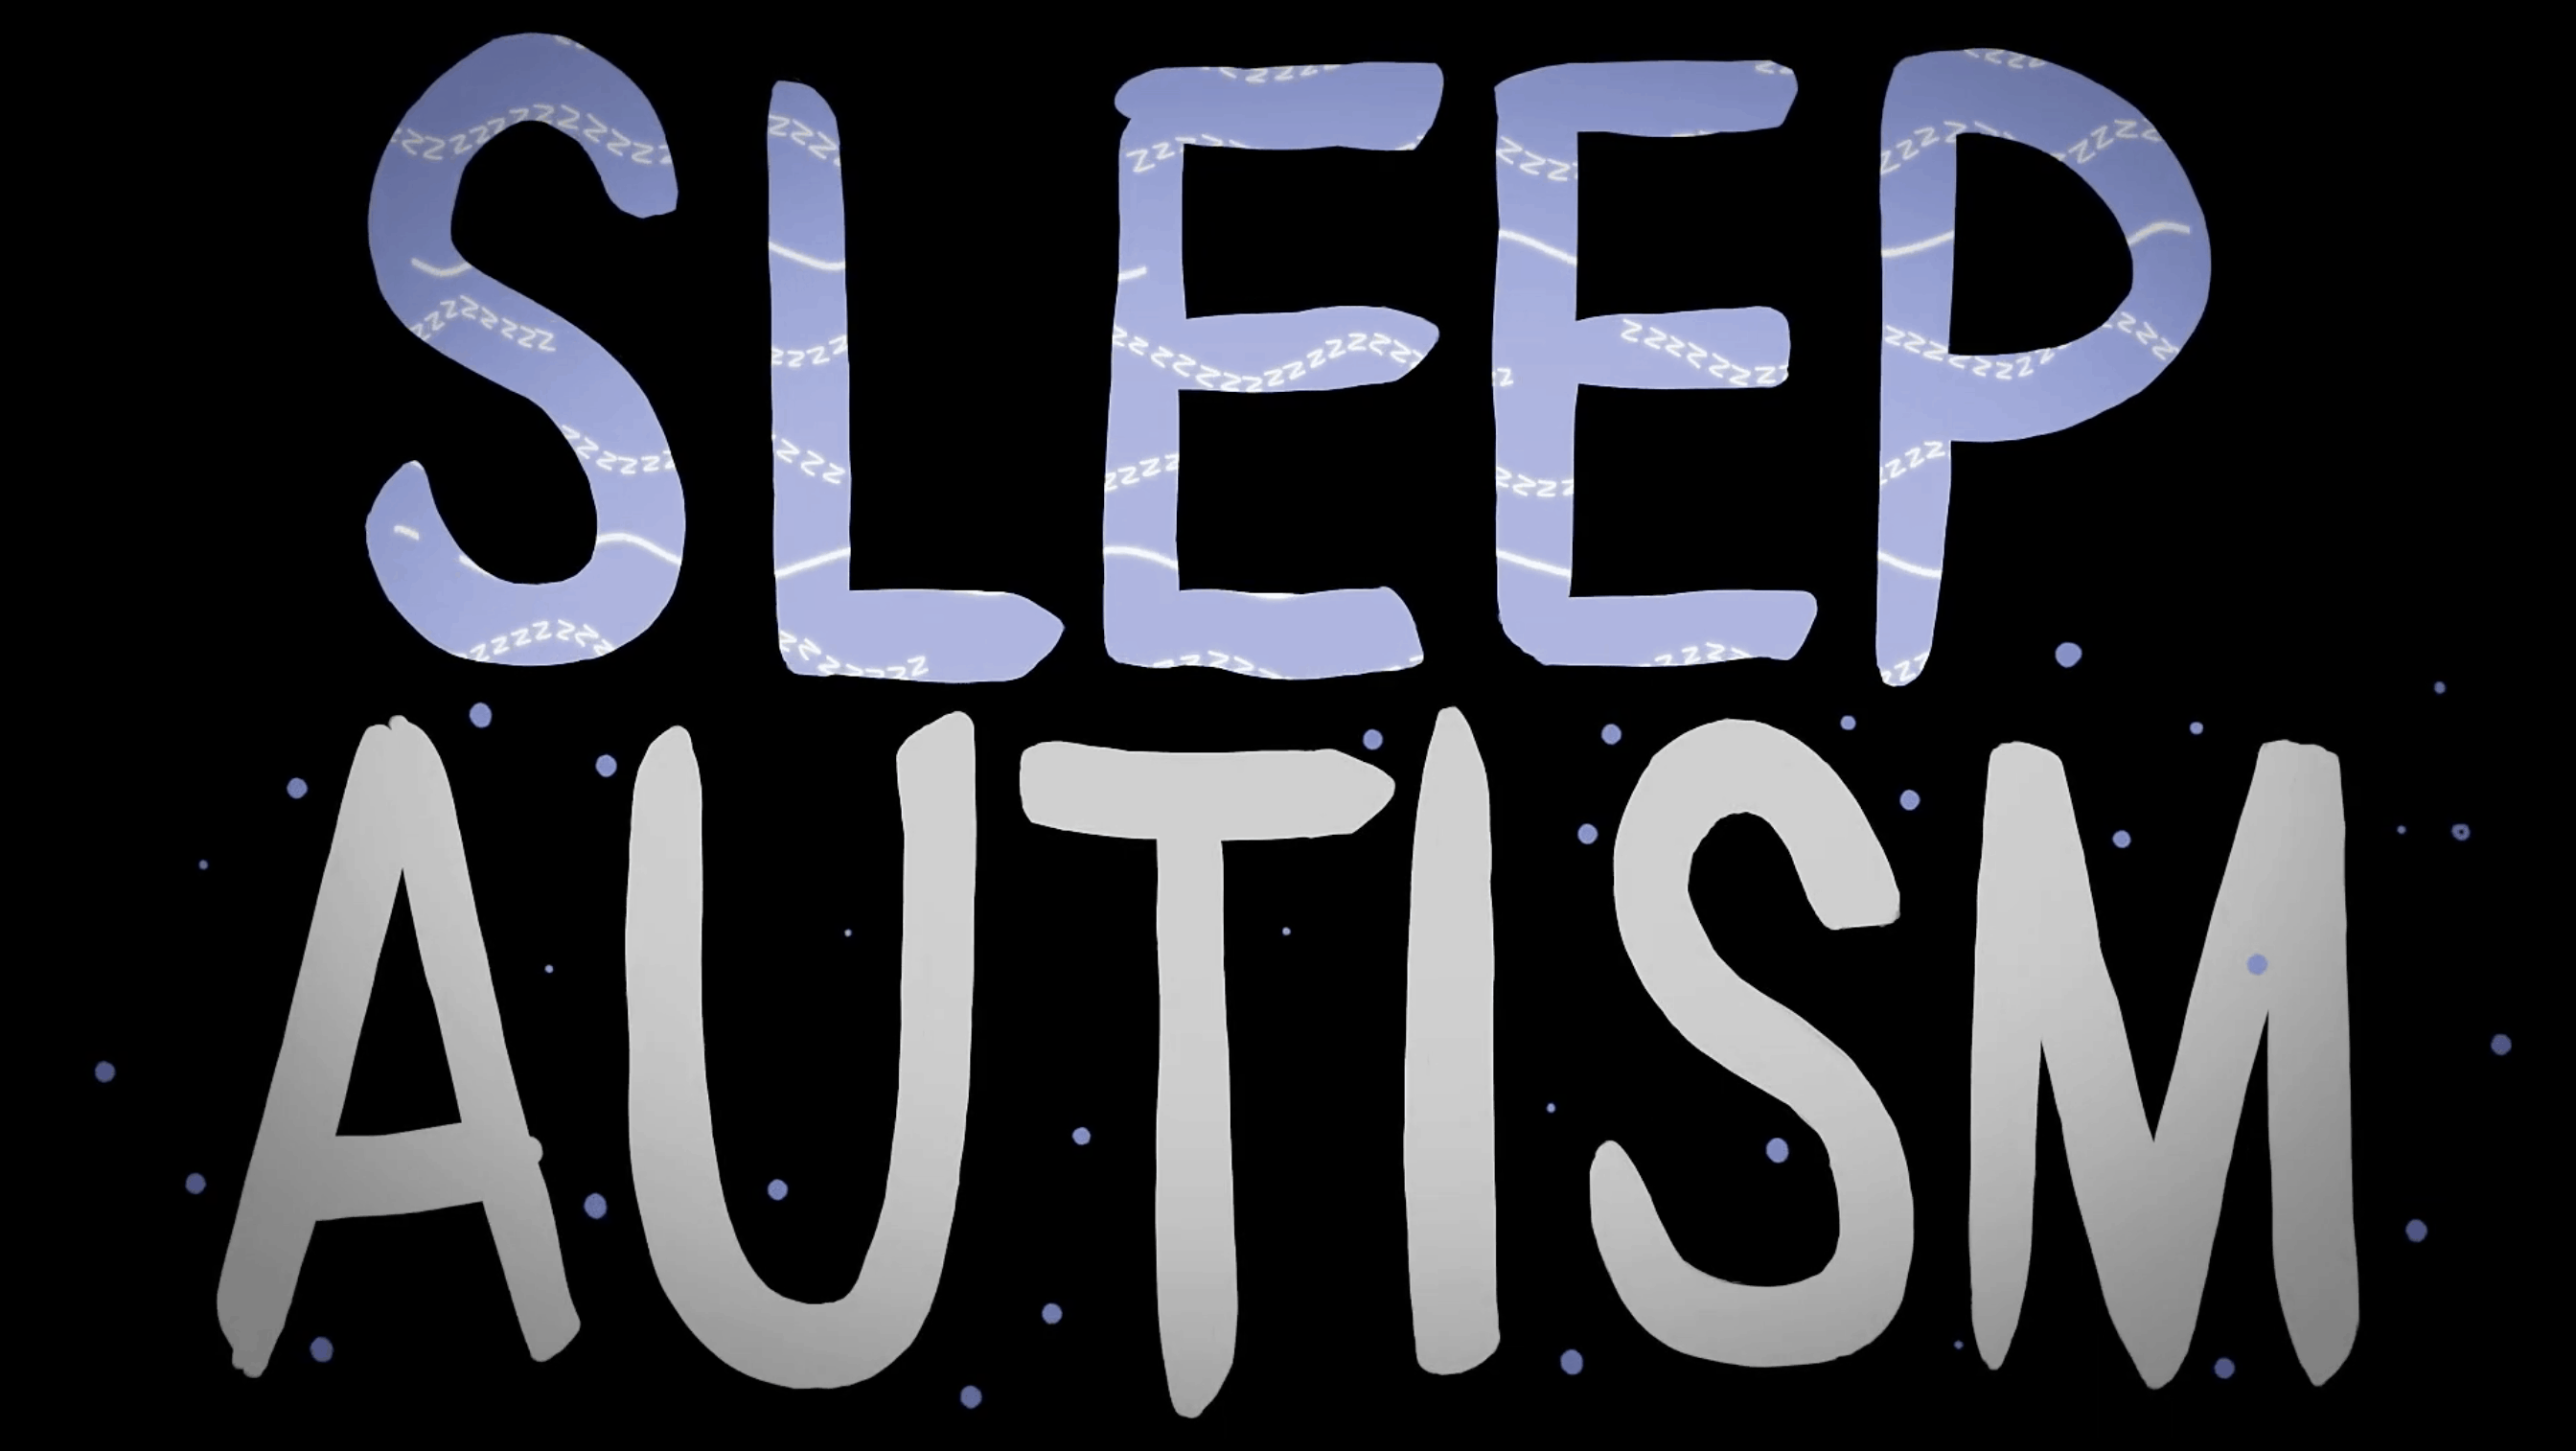 whats-the-connection-between-autism-and-sleep-autism-research-institute